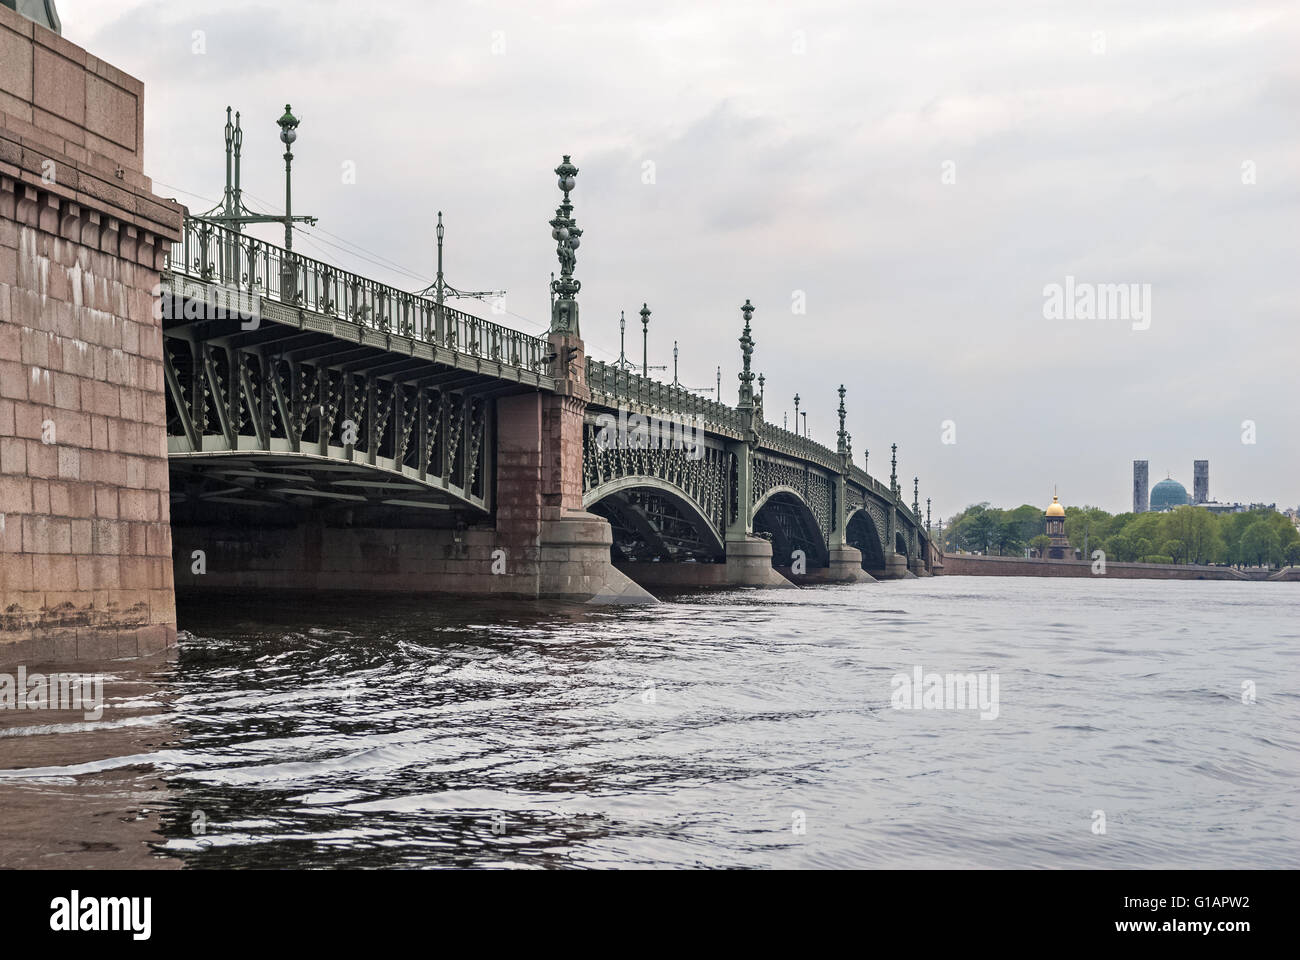 Kamennoostrovsky bridge over the river Neva in St. Petersburg with Muslim mosque and Orthodox chapel in the background. Stock Photo